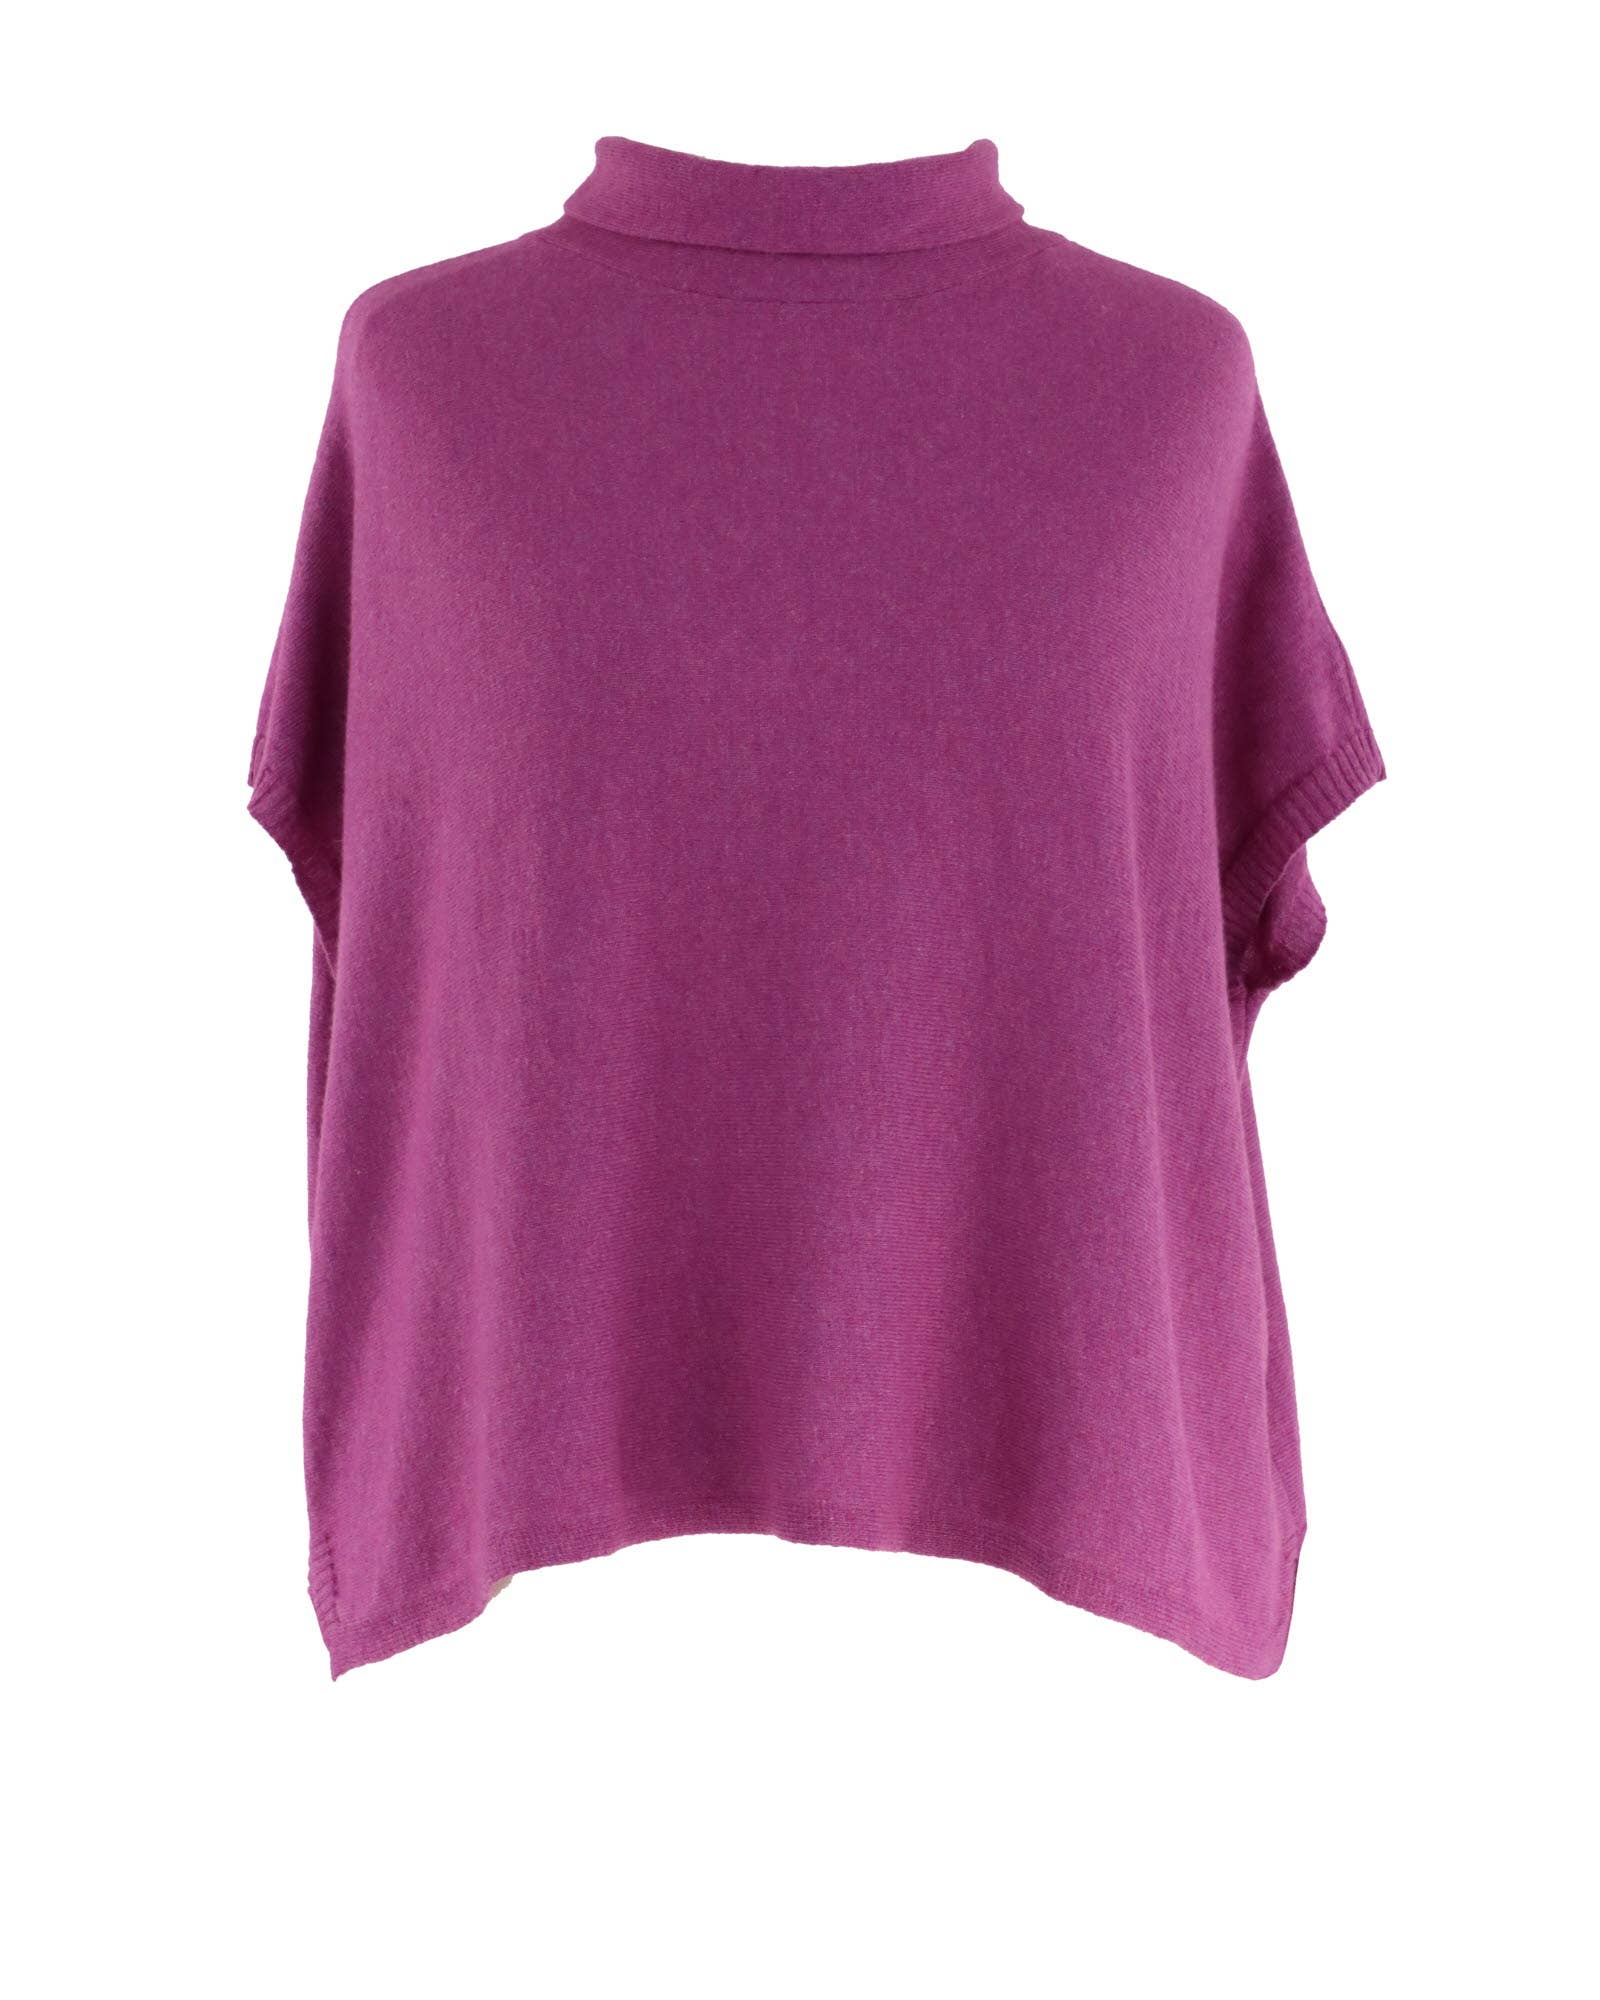 Classic Cashmere Blend Tunic: Venetian Red - The Nancy Smillie Shop - Art, Jewellery & Designer Gifts Glasgow